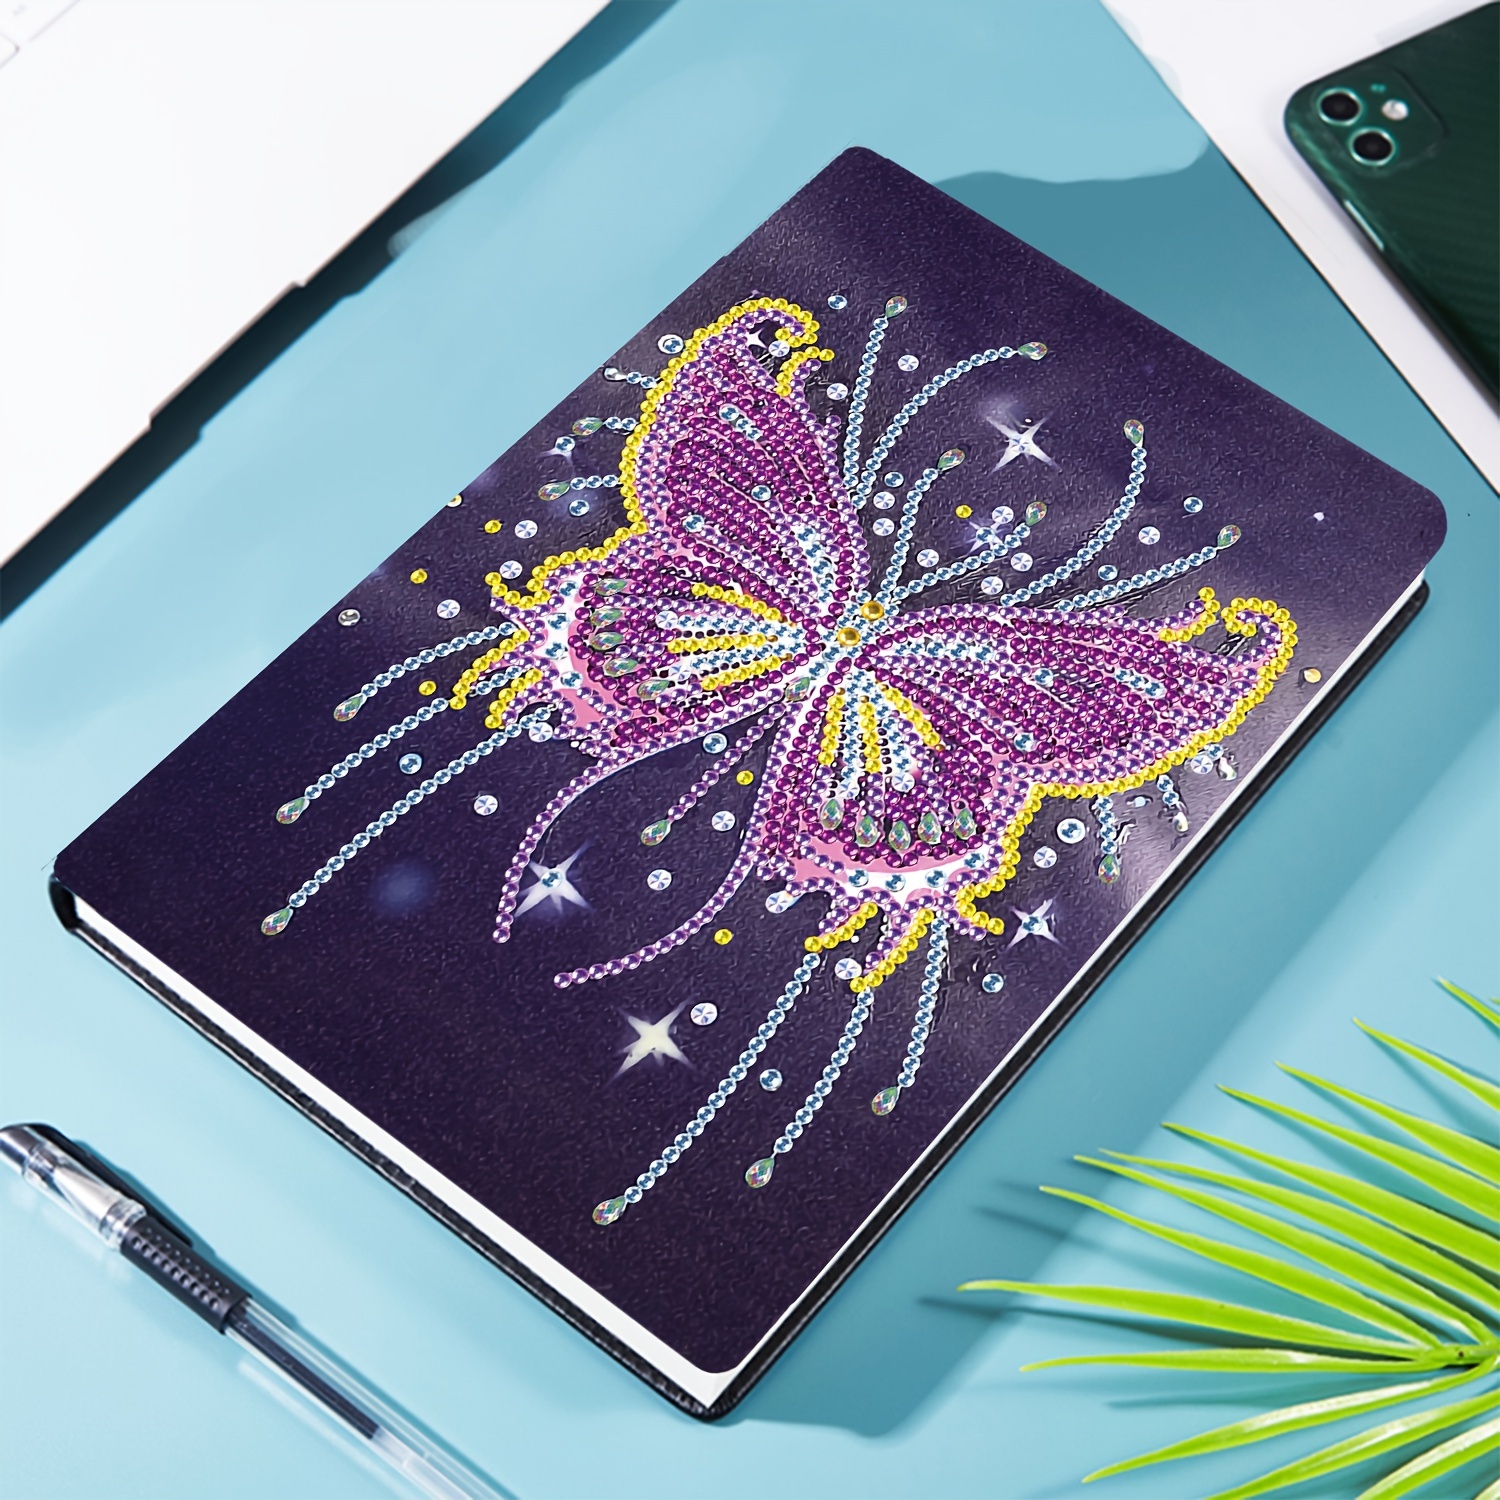  DIY 5D Diamond Painting Notebook Kits Moon Fairy Girl Princess  Leather Cover Special Shaped Journal Sketchbook Crystal Diamond Art  Hardcover Dairy Book Birthday Gift 8.26x5.9IN: Arts, Crafts & Sewing